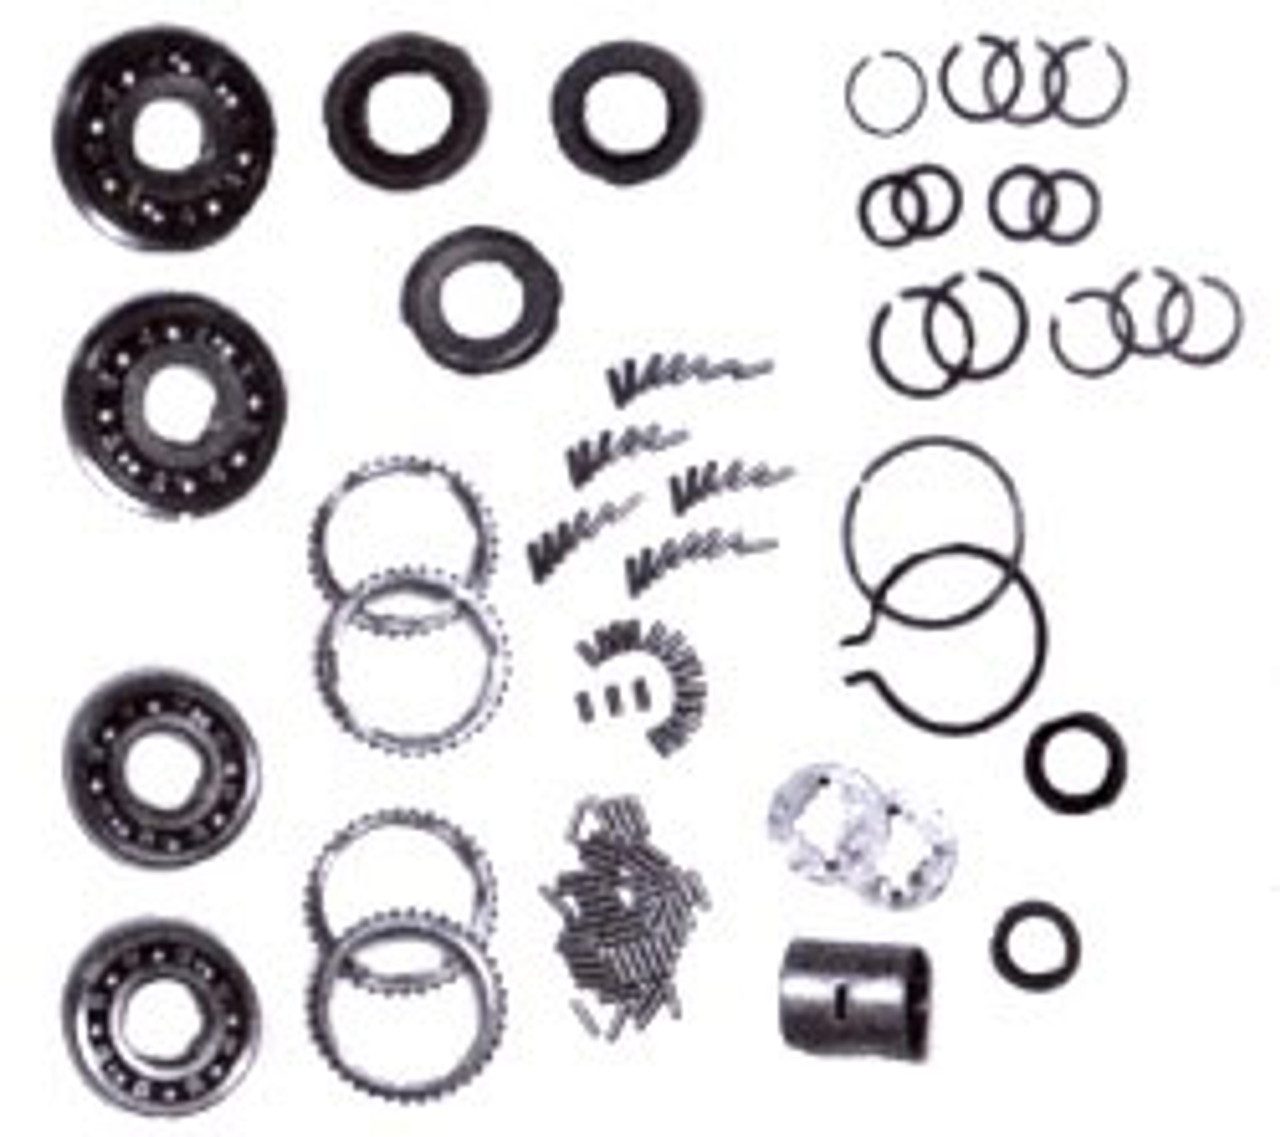 4 Speed Trans Rebuilding Kit for 70 and Newer Dodge and Plymouth 23 spline